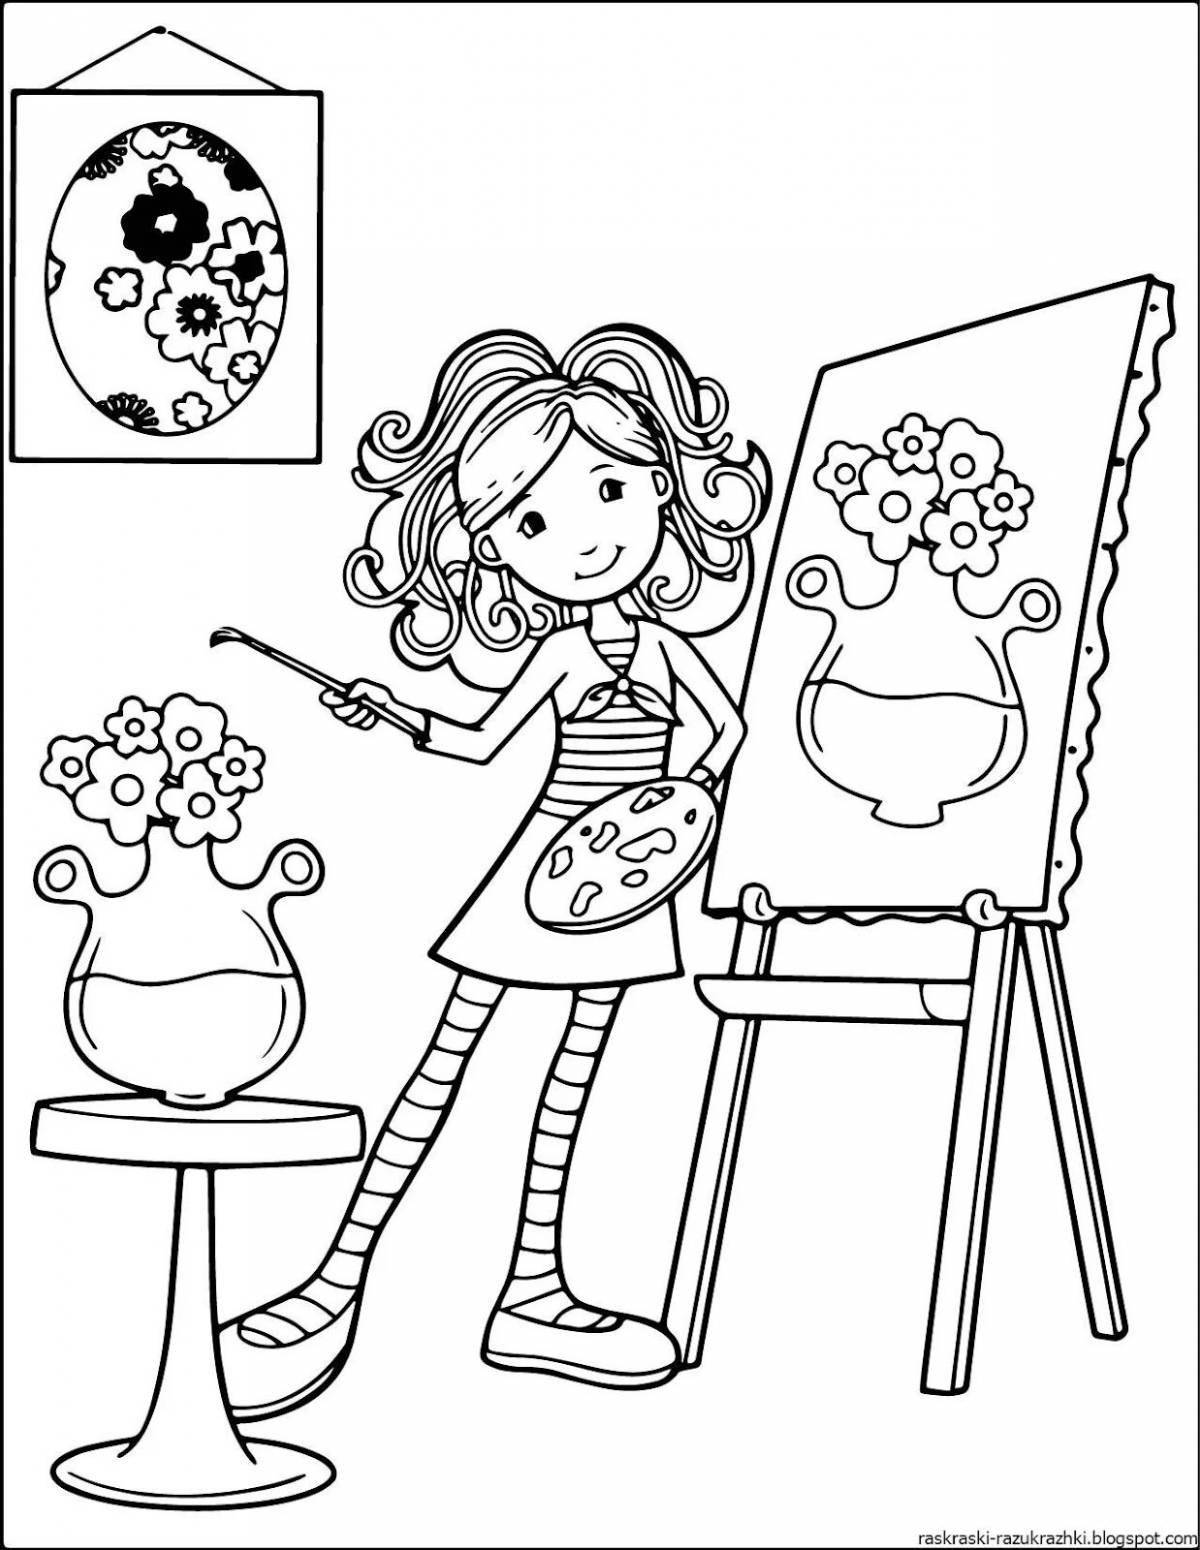 Color explosion coloring book for kids